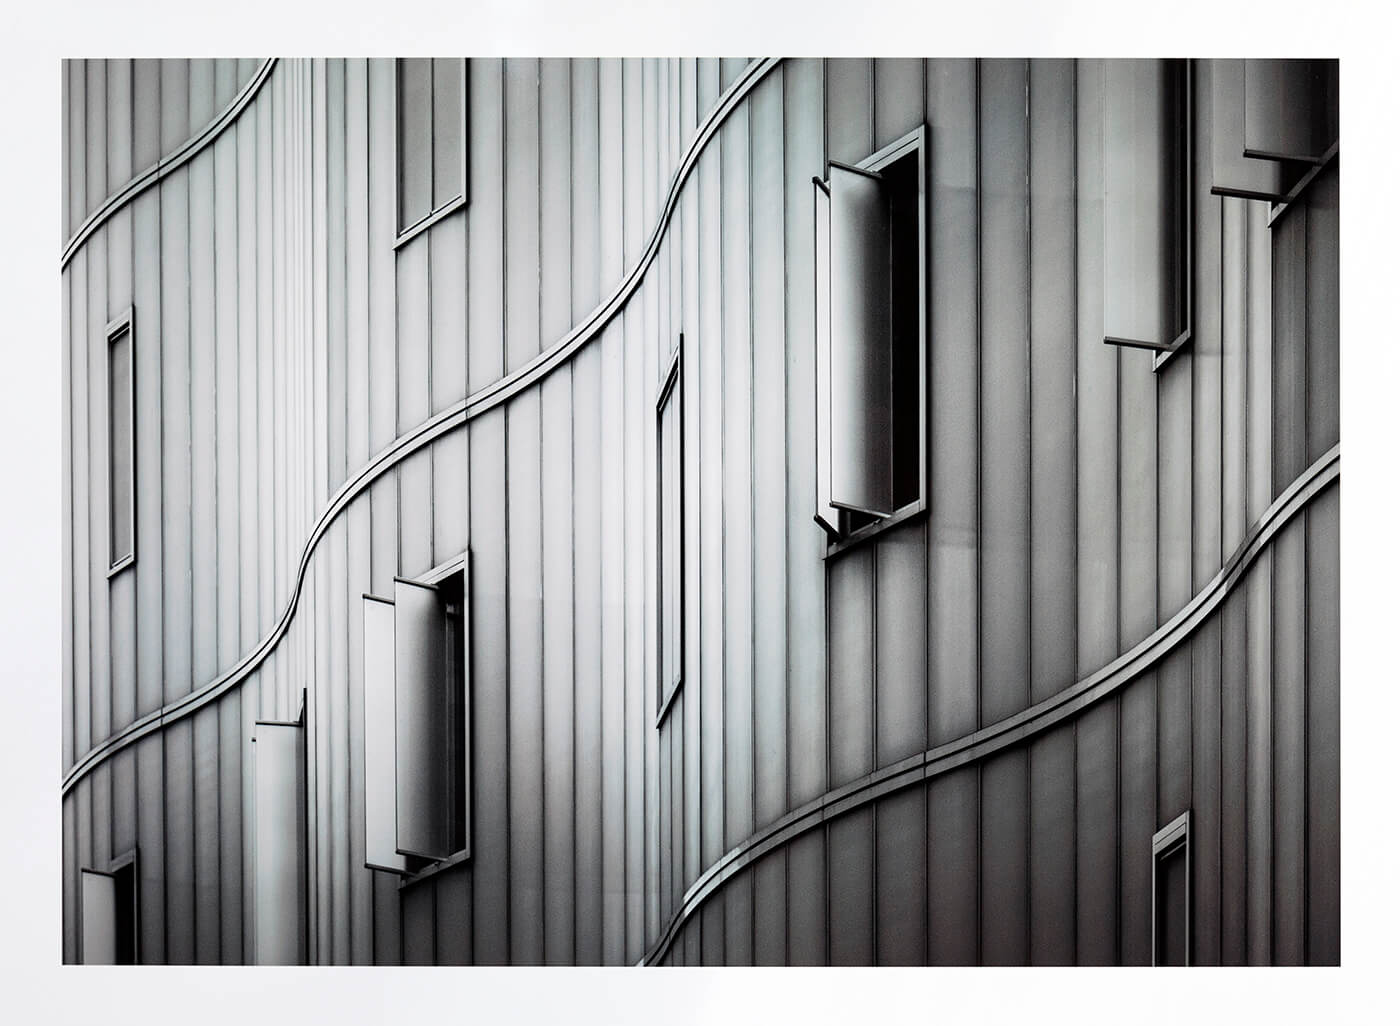 Mark Cornick's Urban View Category Winning Image 'Architectural Detail, London, England'